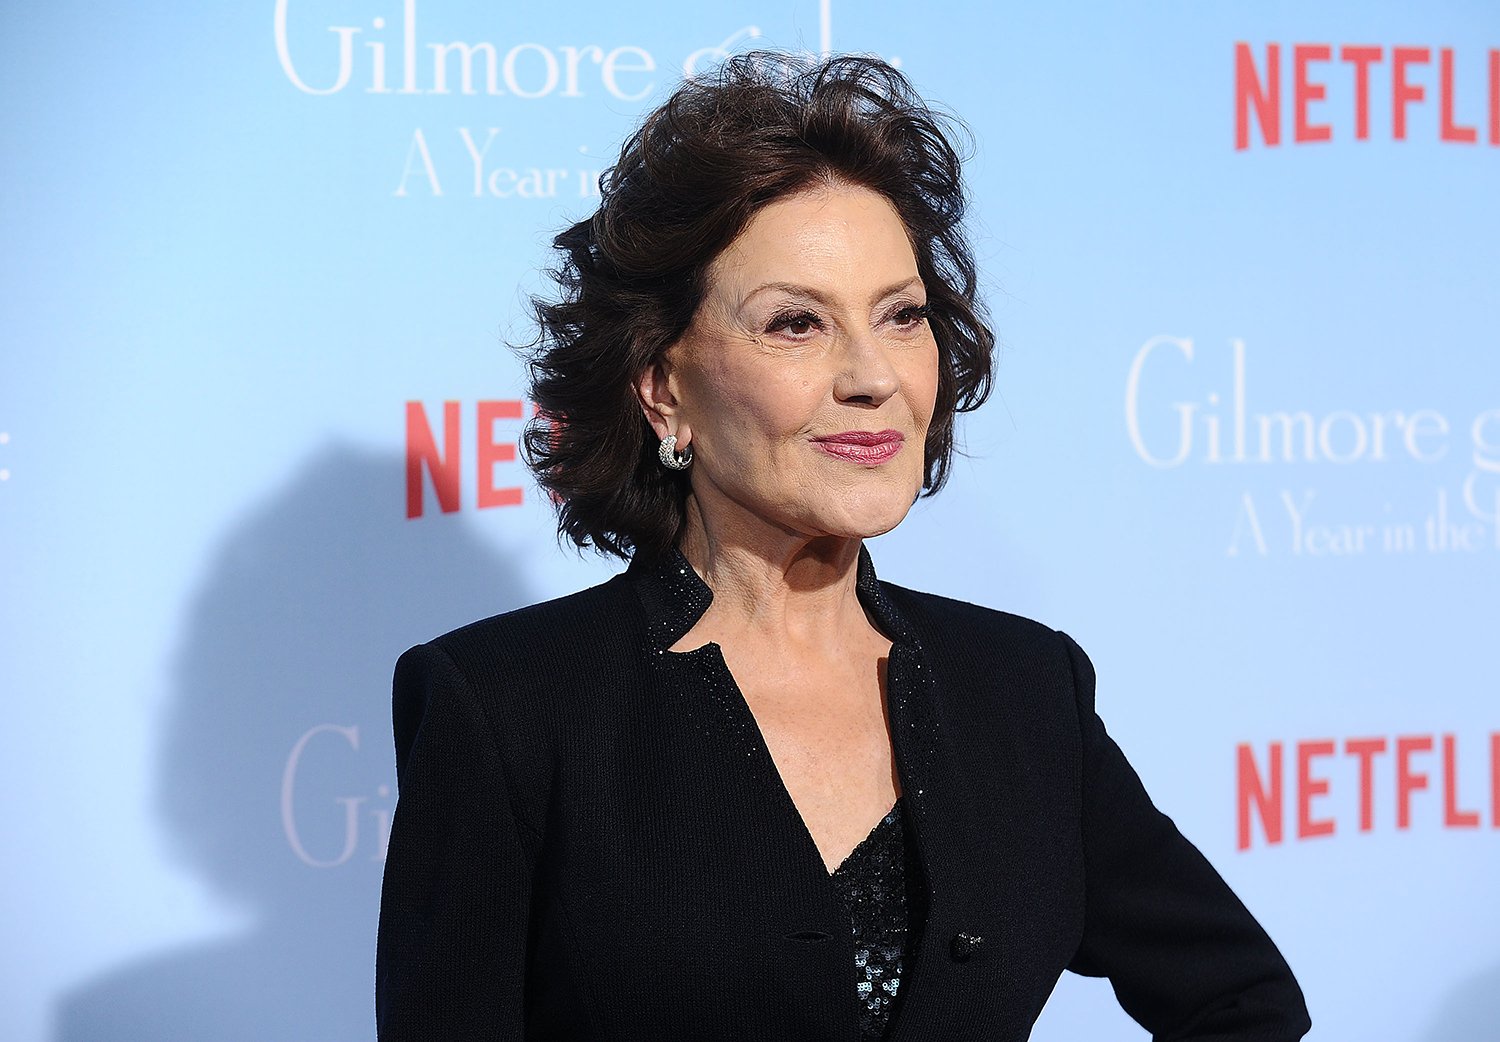 Gilmore Girls star Kelly Bishop, who will appear in The Marvelous Mrs Maisel Season 4.